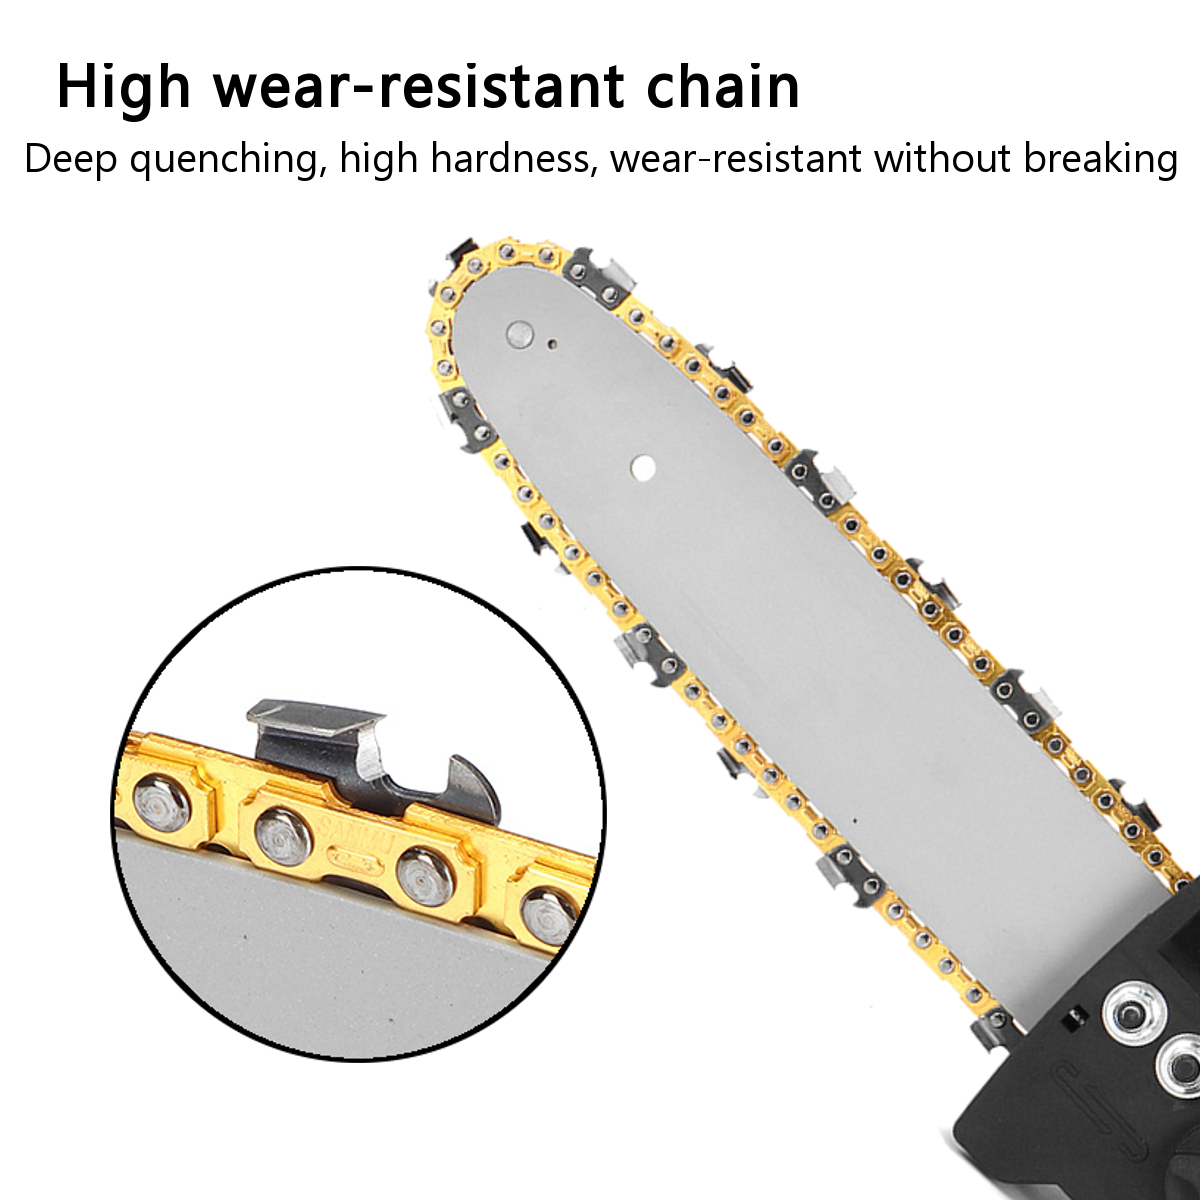 10inch-298VF-Cordless-Electric-Chain-Saw-Handheld-Chainsaw-Wood-Tree-Cutter-W-12pcs-Battery-1833237-4